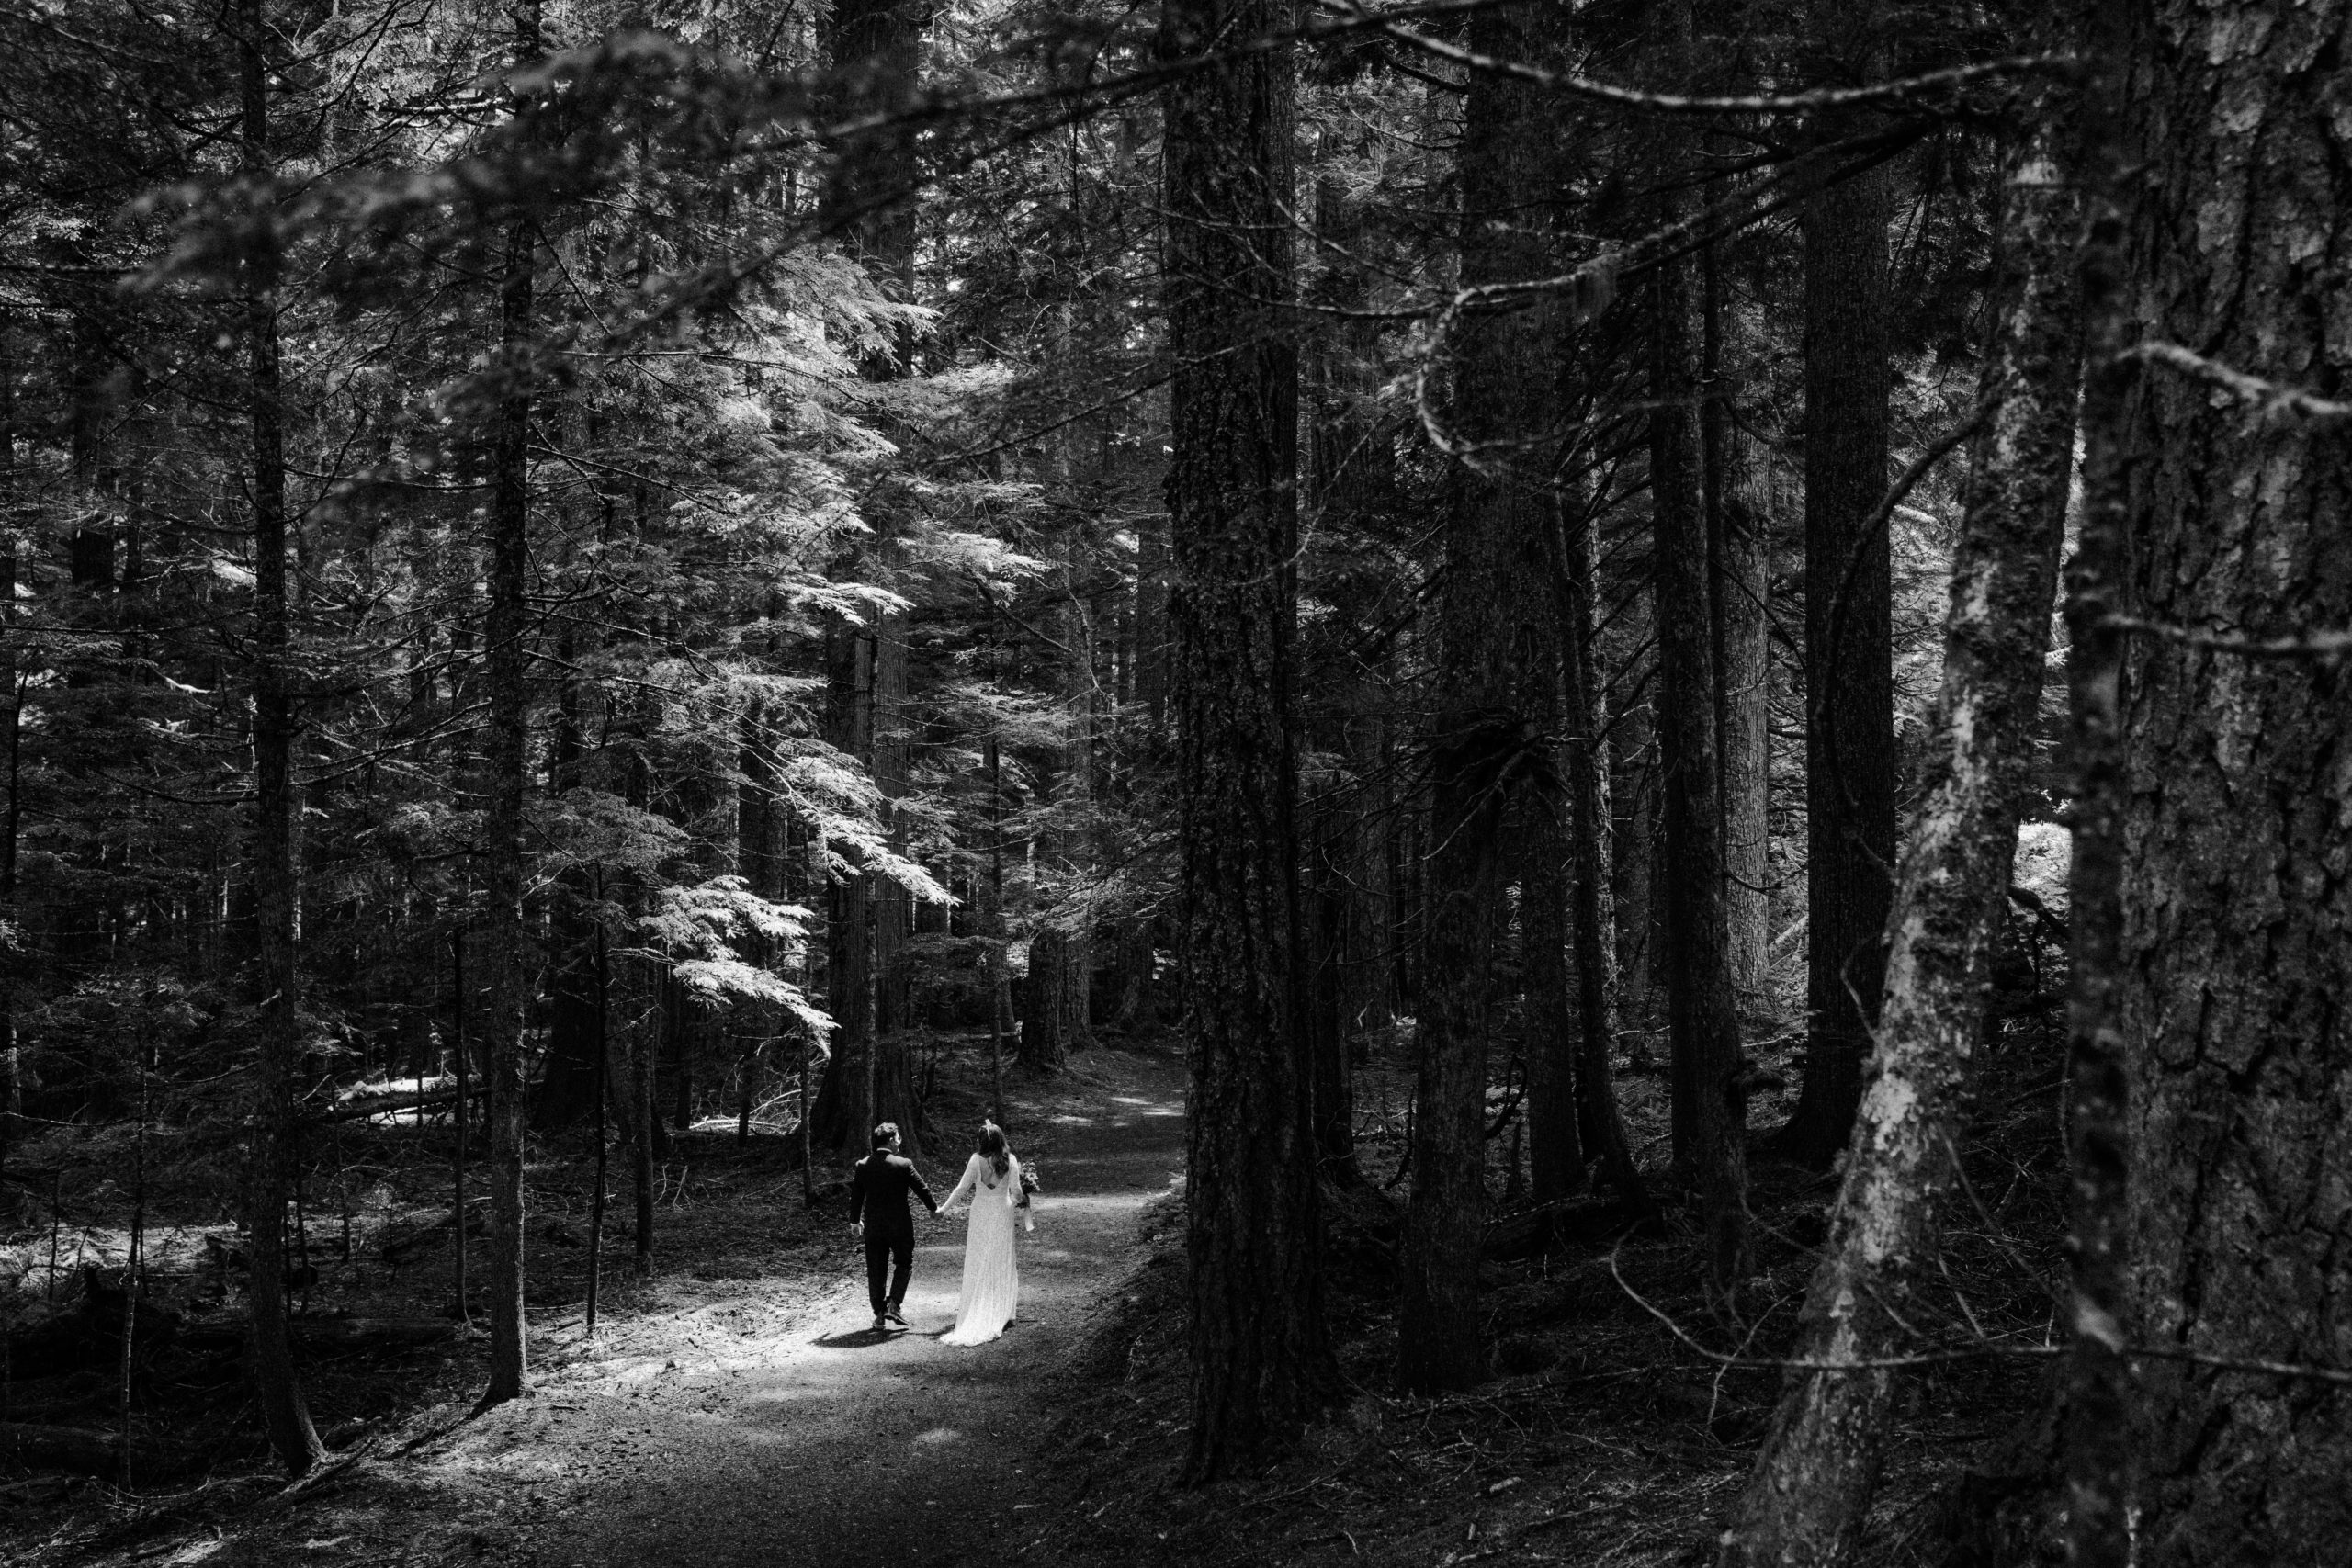 couple waking through national forest in washington state